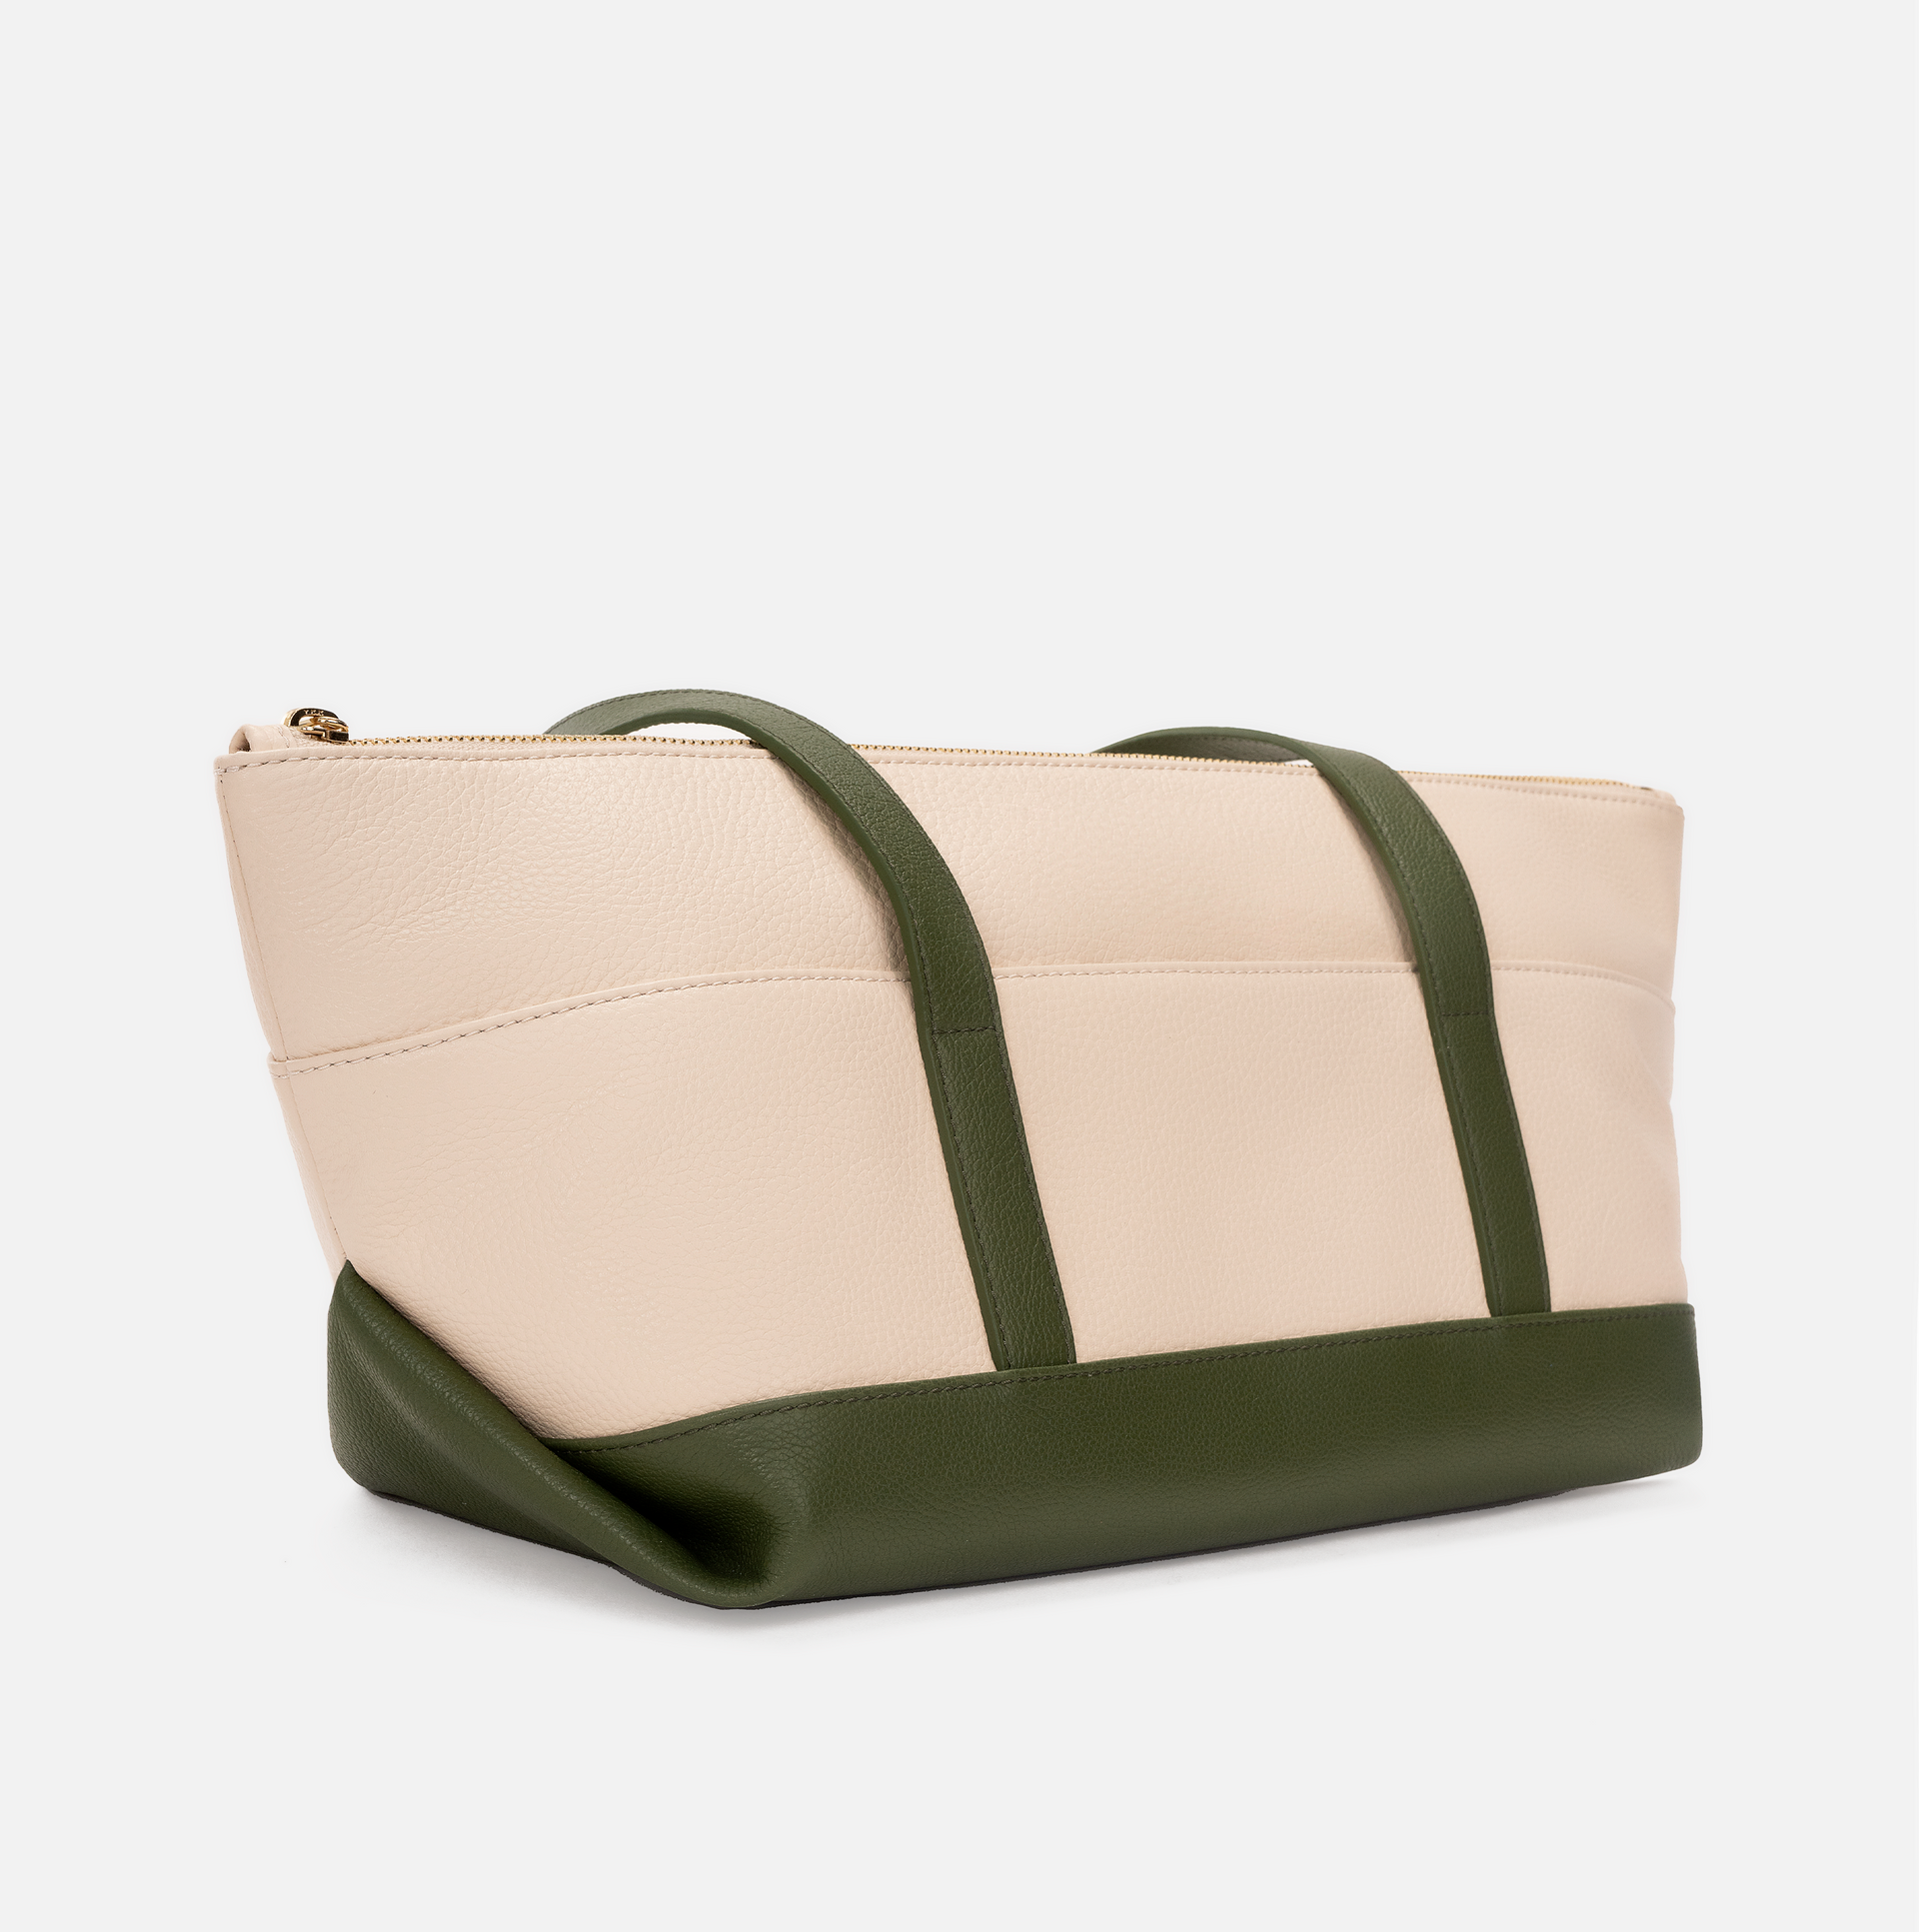 Maria pebble leather shoulder bag in bare/chive